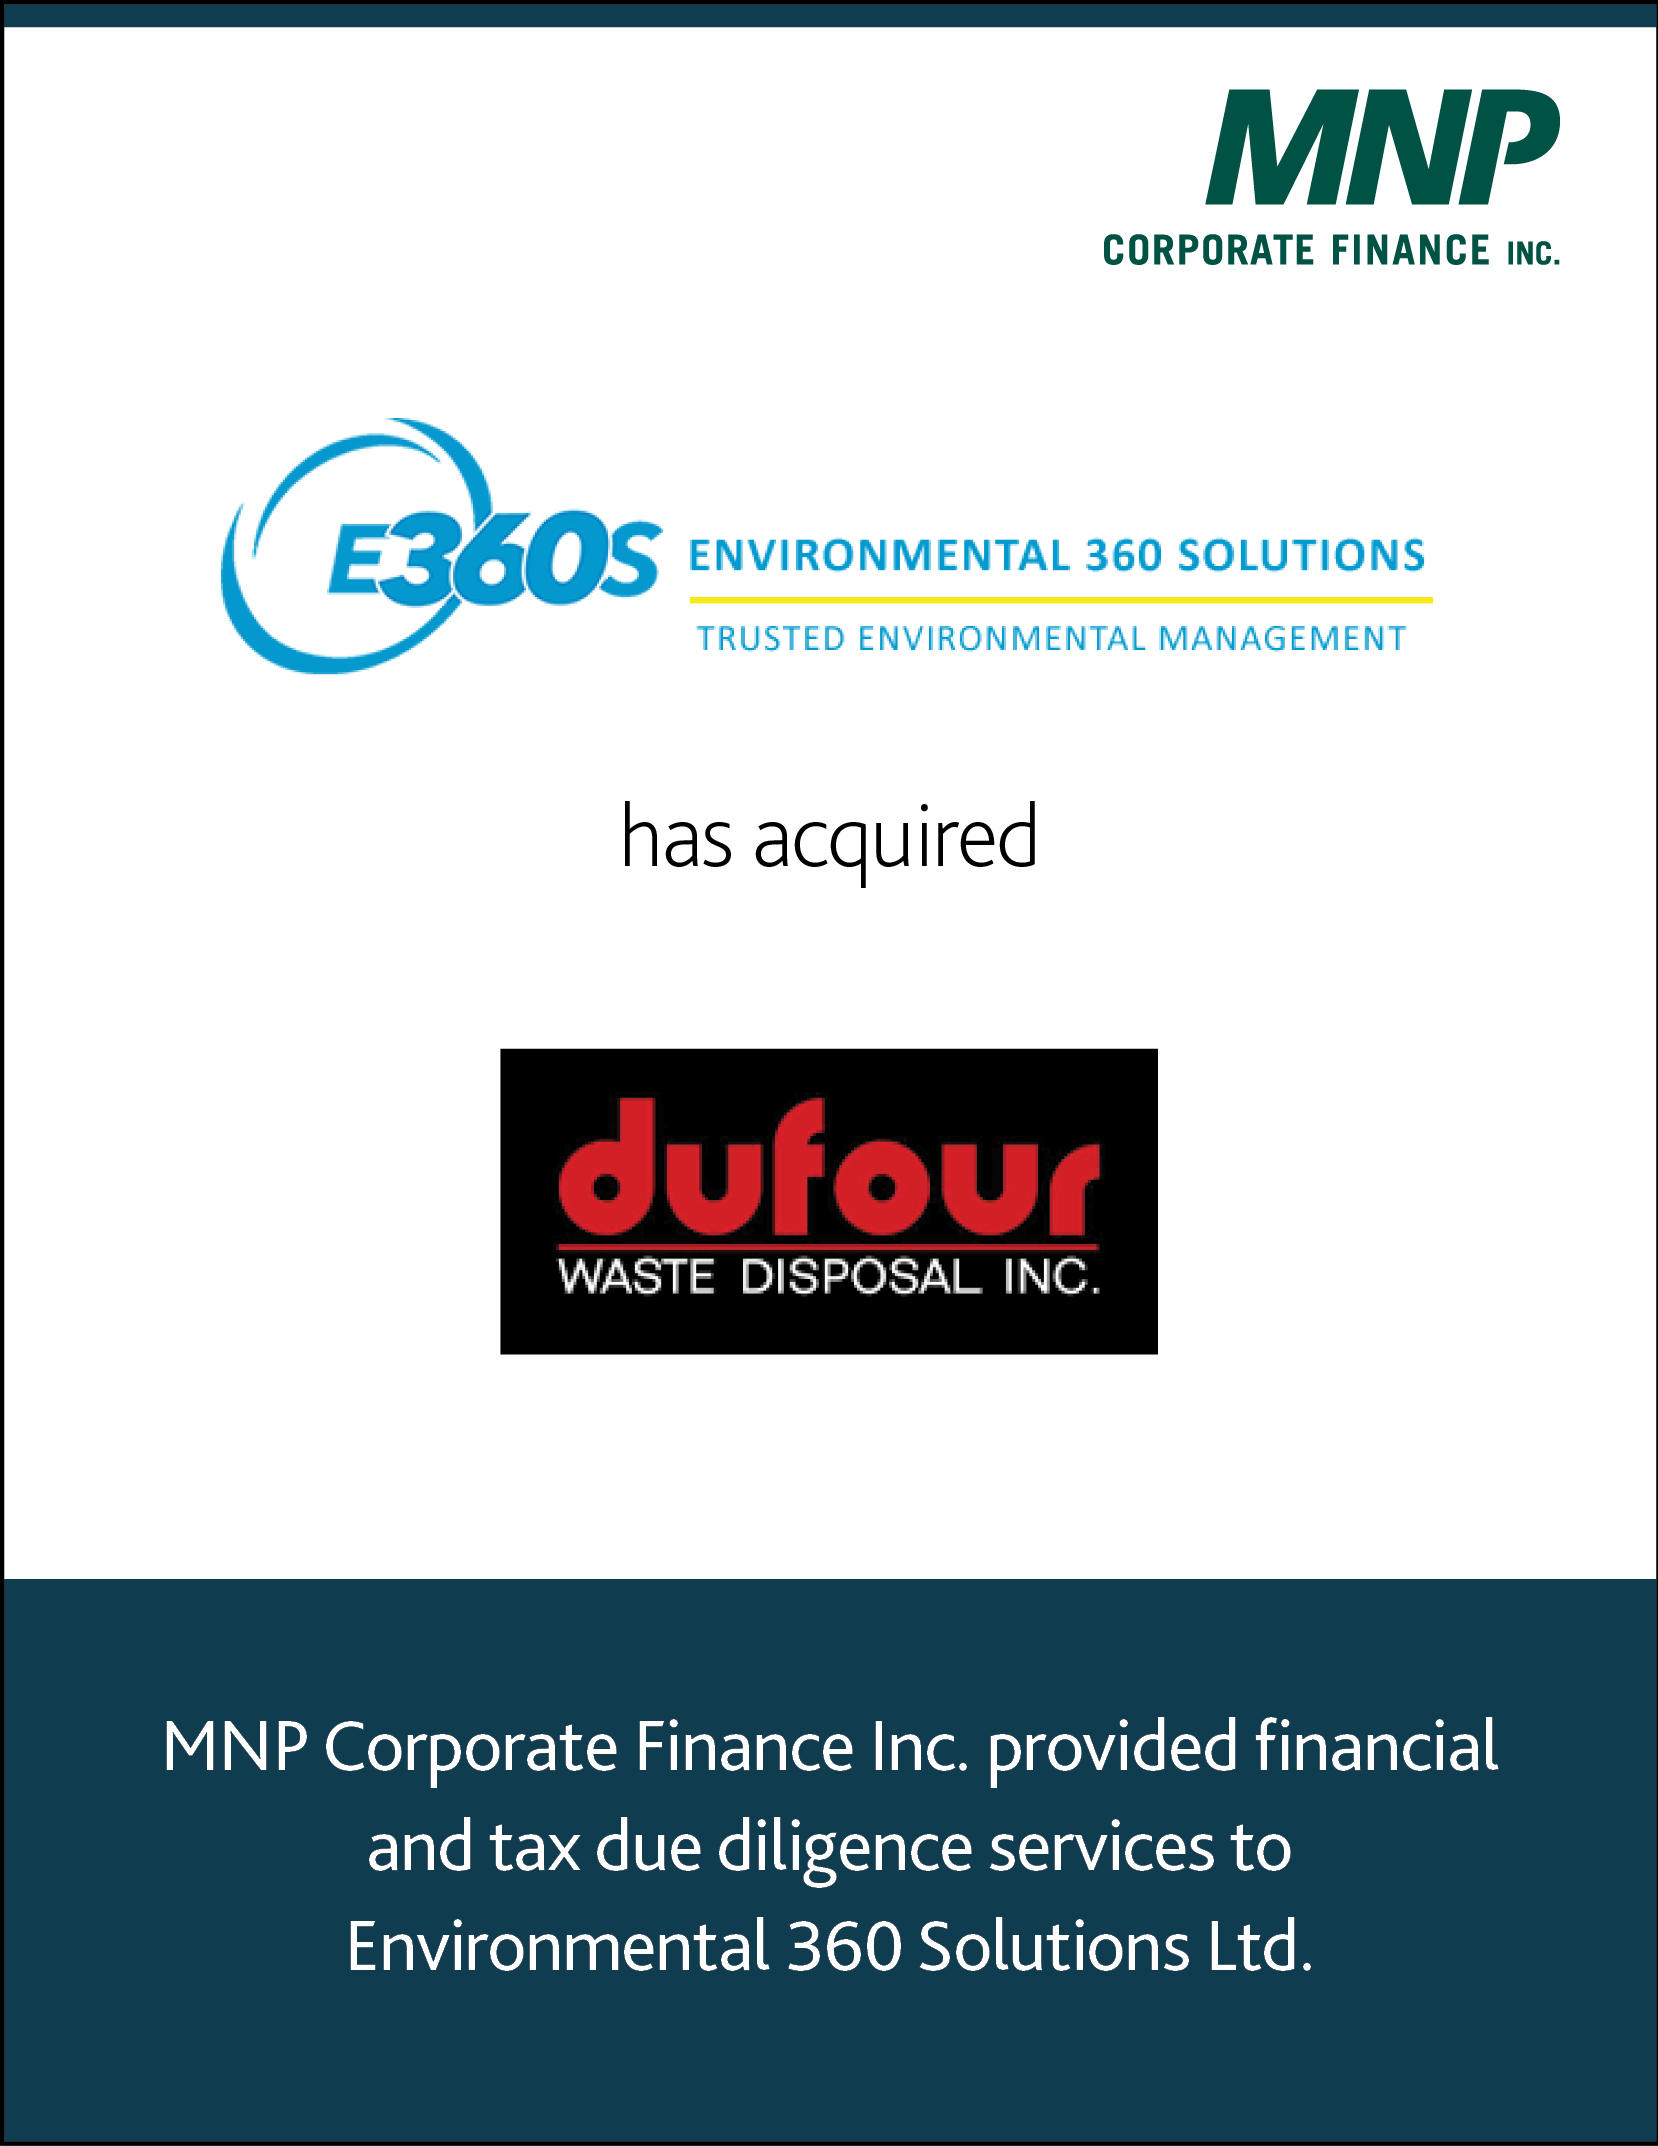 Environmental 360 solutions has acquired dufour Waste Disposal Inc